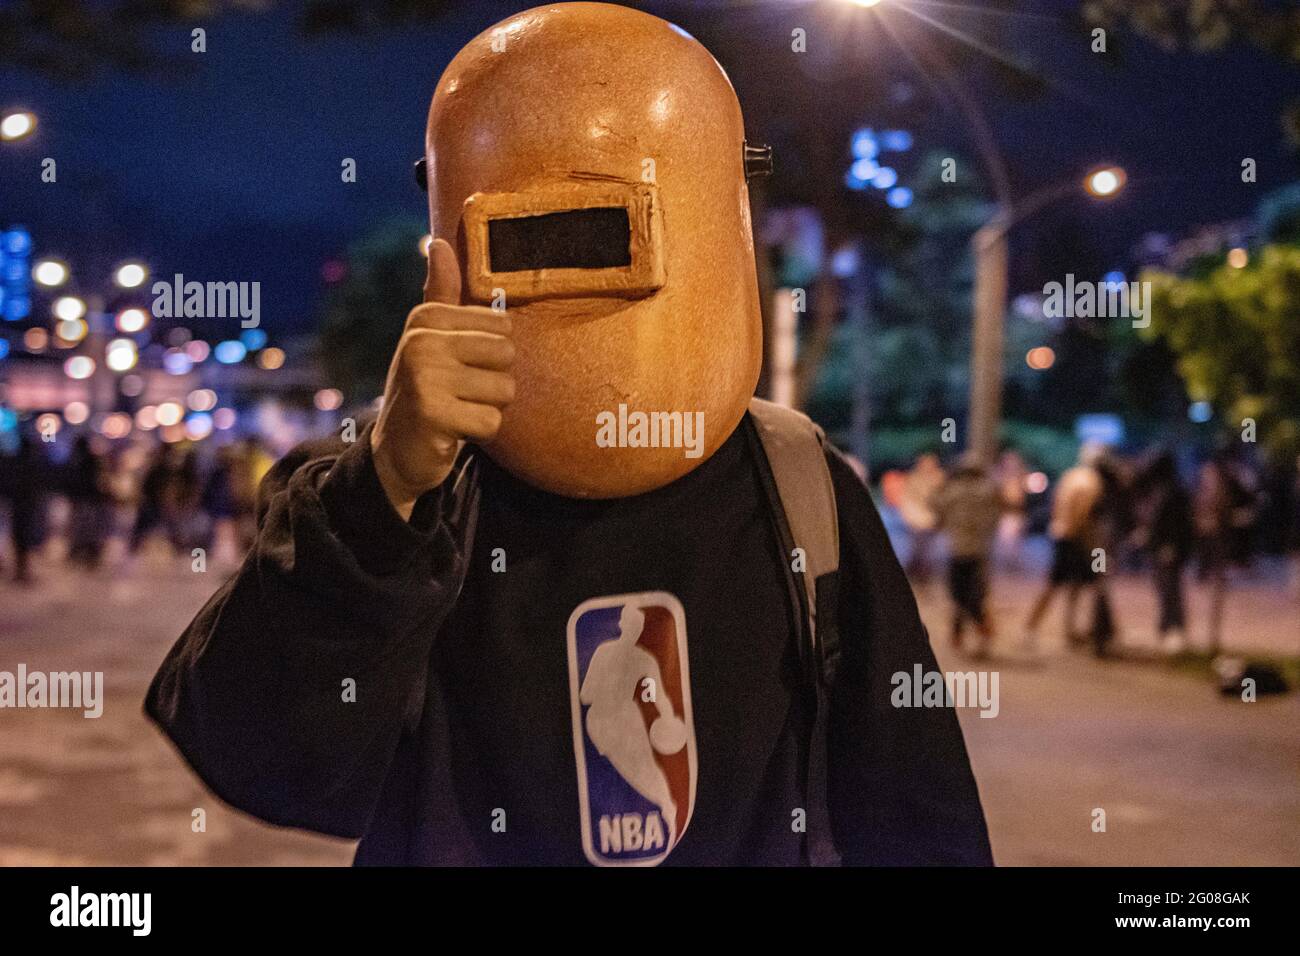 Medellin, Colombia on May 31, 2021. A demonstrator poses for a photo while using a welding mask to protect his identity as a group of hooded demonstrators clashes with Colombia's riot police (ESMAD) in Medellin, Colombia during the on going anti government protests against Presiden Ivan Duque's tax and health reform and police brutality and unrest that leaves at least 70 dead during the past month, in Medellin, Colombia on May 31, 2021. Stock Photo